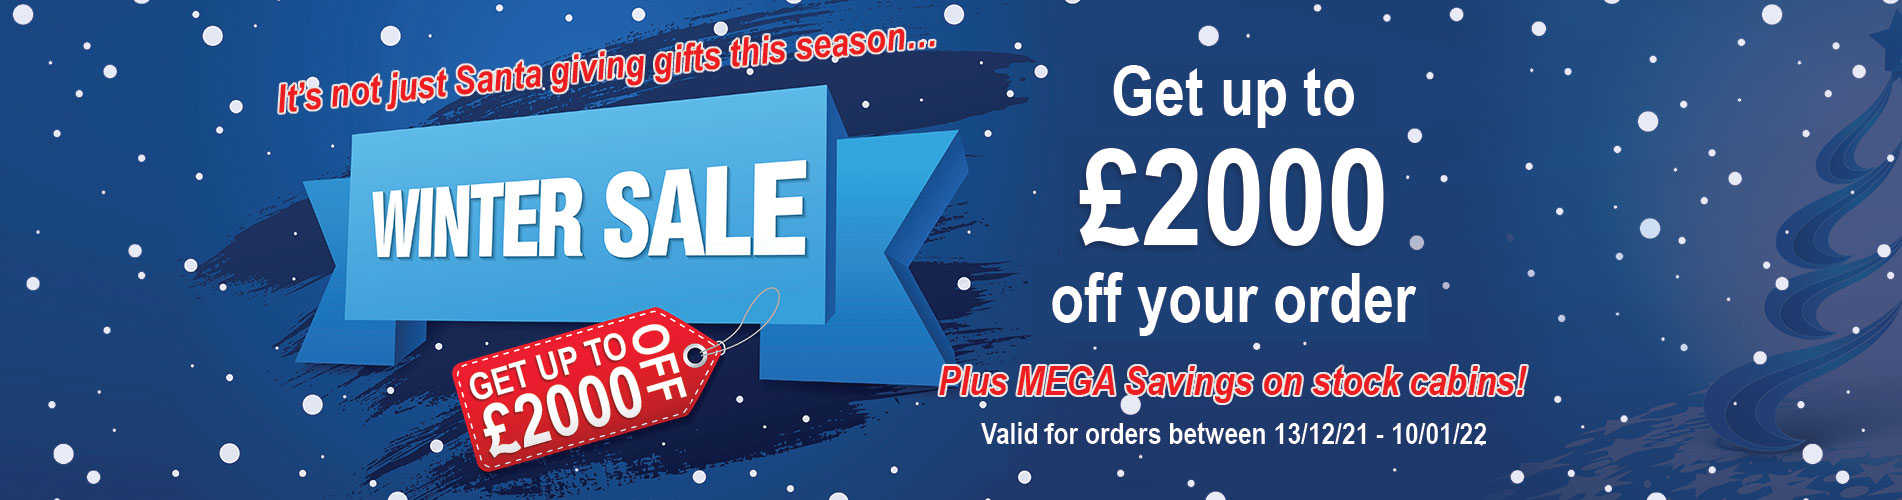 Winter Sale - Up to £2000 off your order